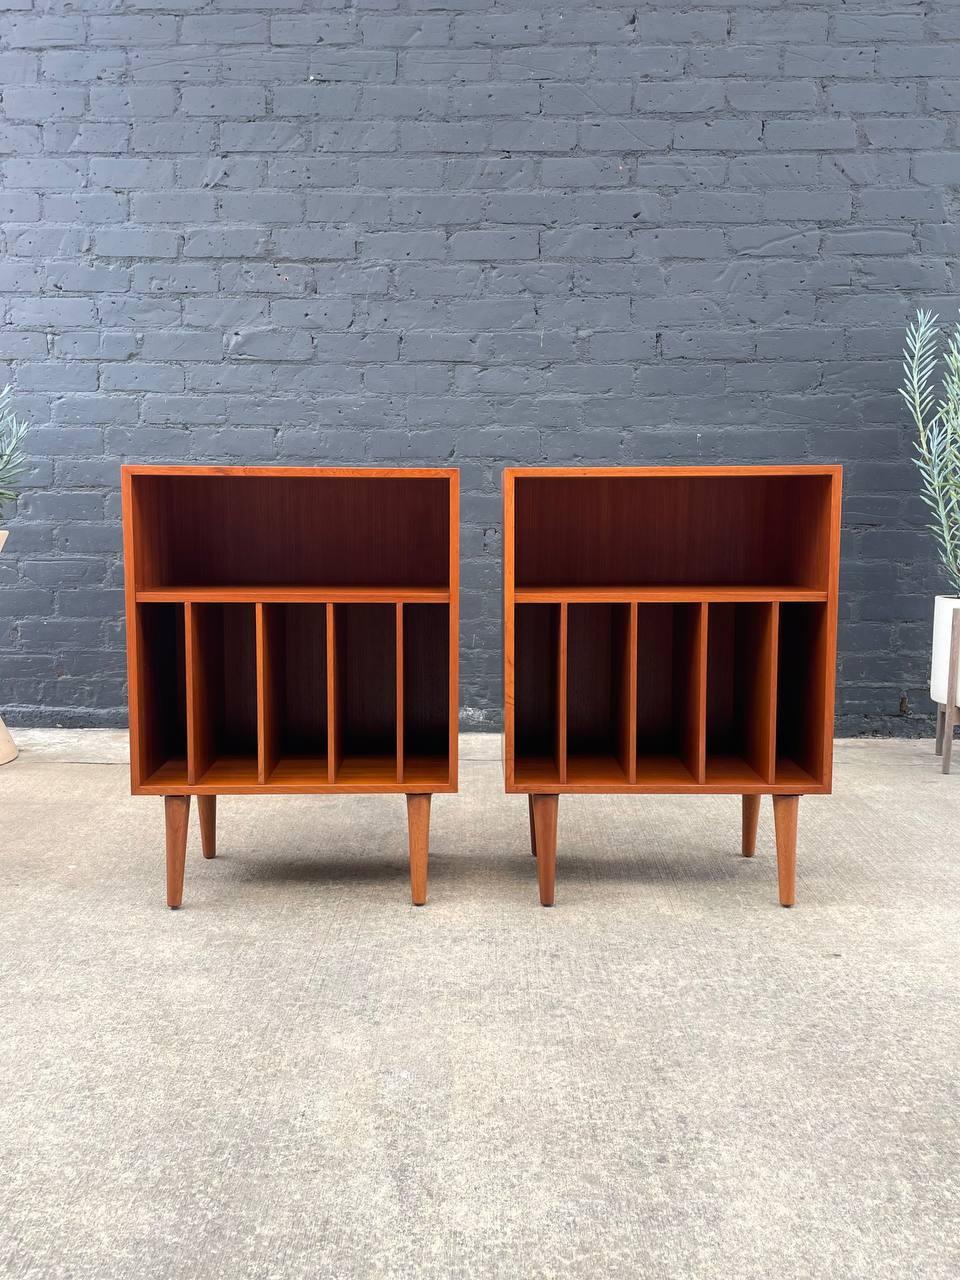 Newly Refinished - Pair of Danish Modern Teak Mini Adjustable Bookshelves In Excellent Condition For Sale In Los Angeles, CA